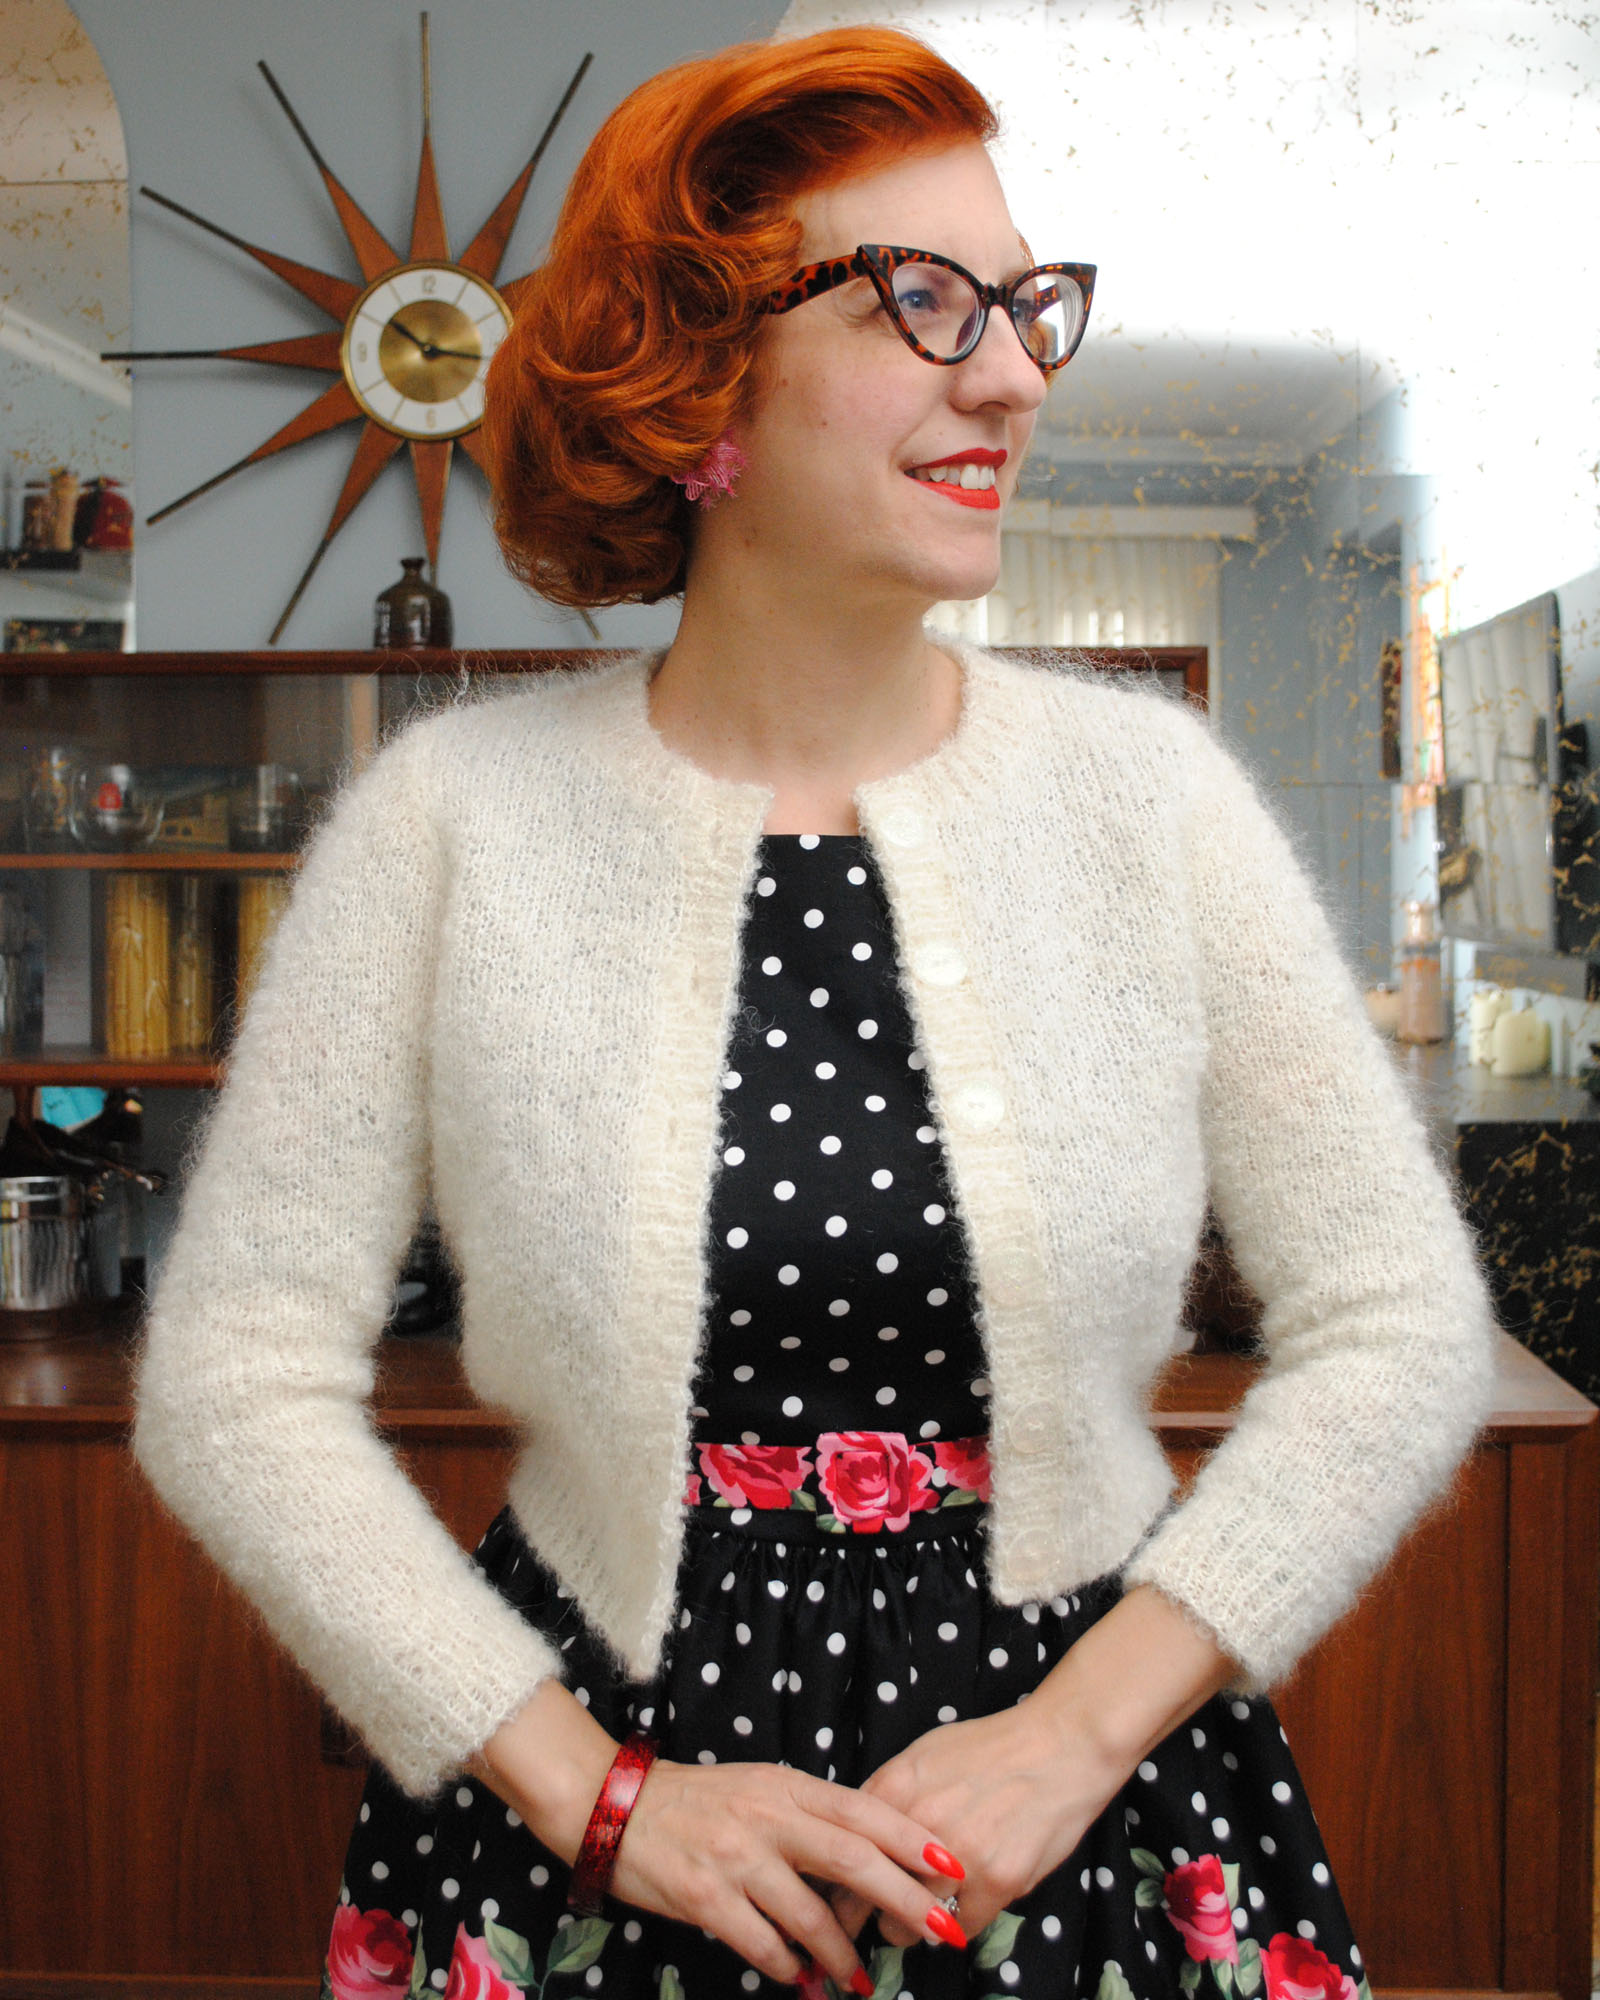 Dreamy boucle cardigan and a dress - Tasha Could Make That